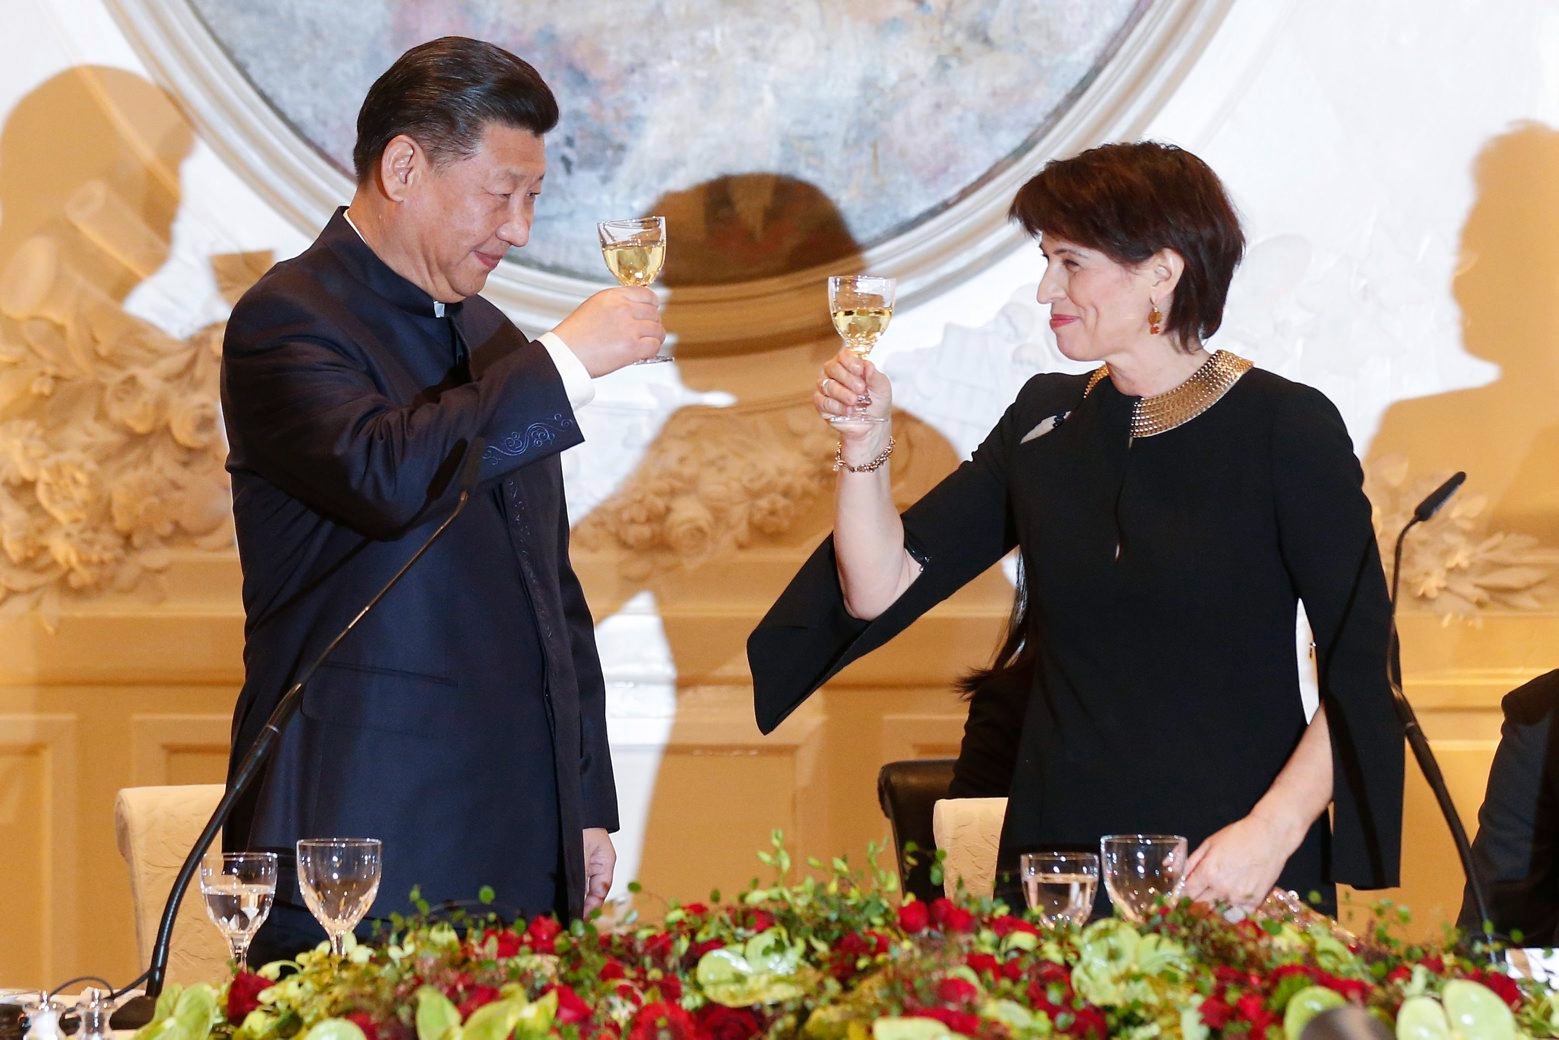 Swiss Federal President Doris Leuthard, right, and China's President Xi Jinping raise their glasses at a gala dinner, during Xi's two days state visit to Switzerland, in Bern, Switzerland, on Sunday, January 15, 2017. (KEYSTONE/POOL/Peter Klaunzer) SWITZERLAND CHINA STATE VISIT